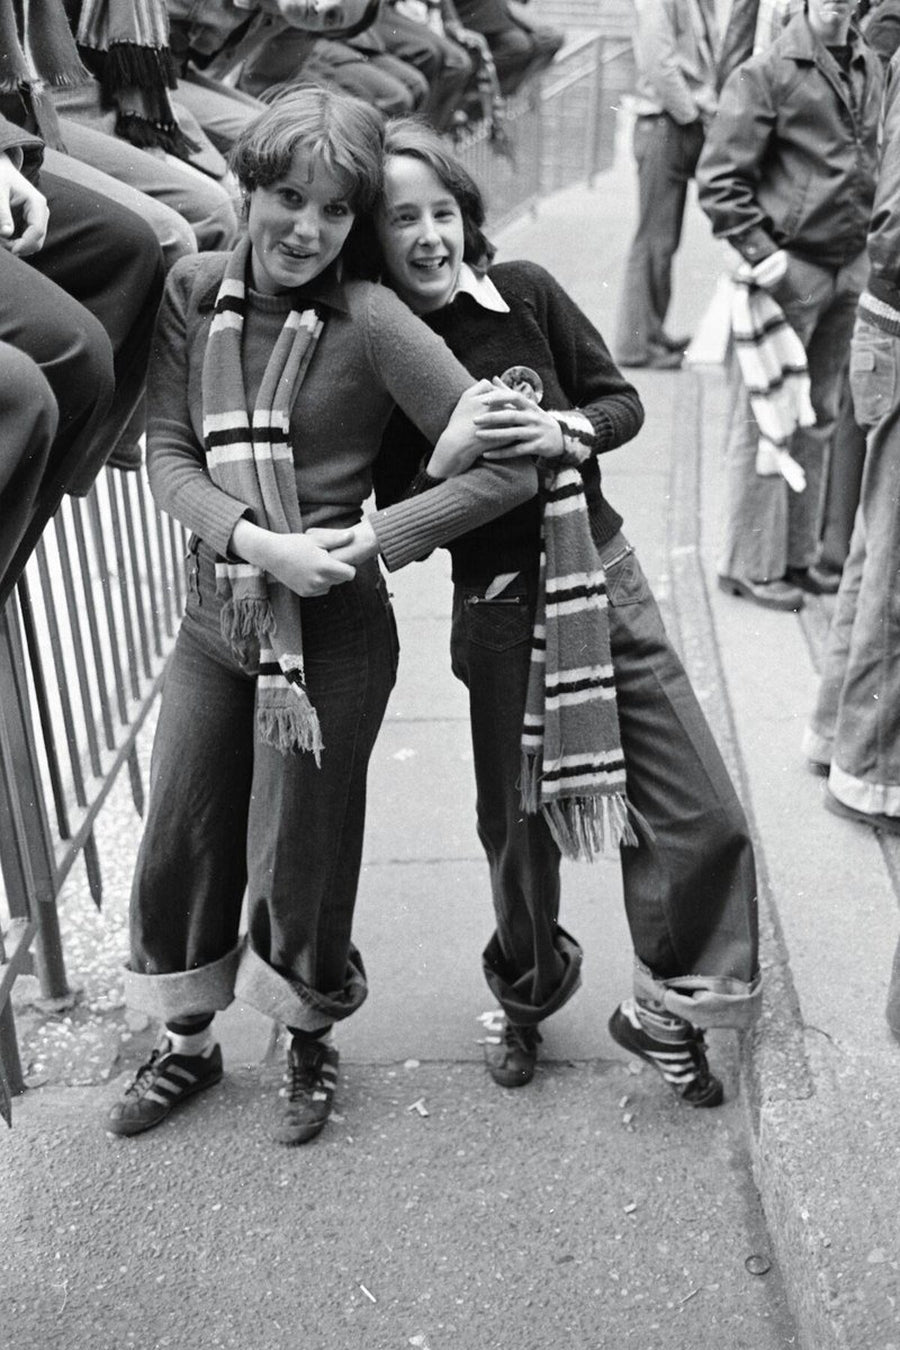 Two Manchester United fans by Iain SP Reid - 1976